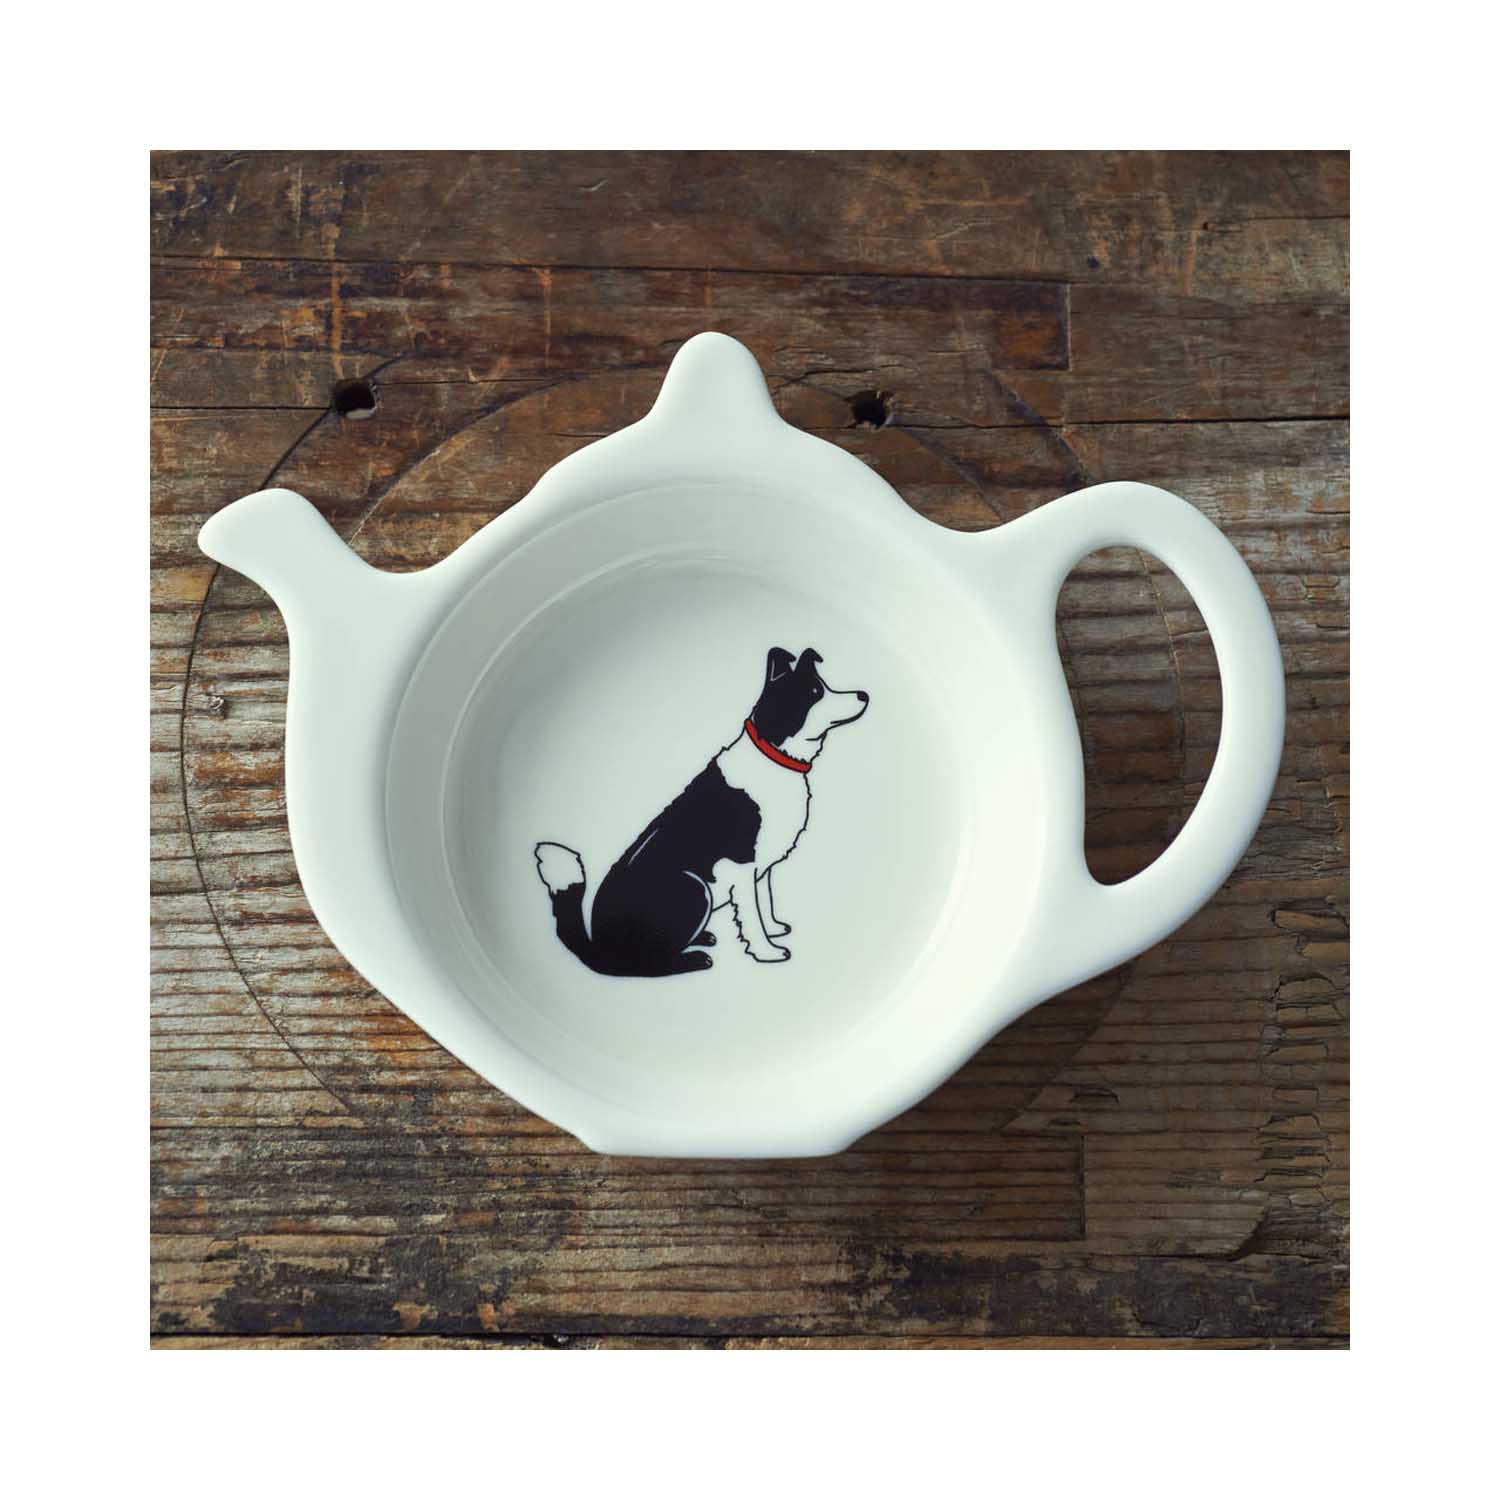 Dog Lover Gifts available at Dog Krazy Gifts - Lola the Border Collie Teabag Dish - part of the Sweet William range available from www.DogKrazyGifts.co.uk